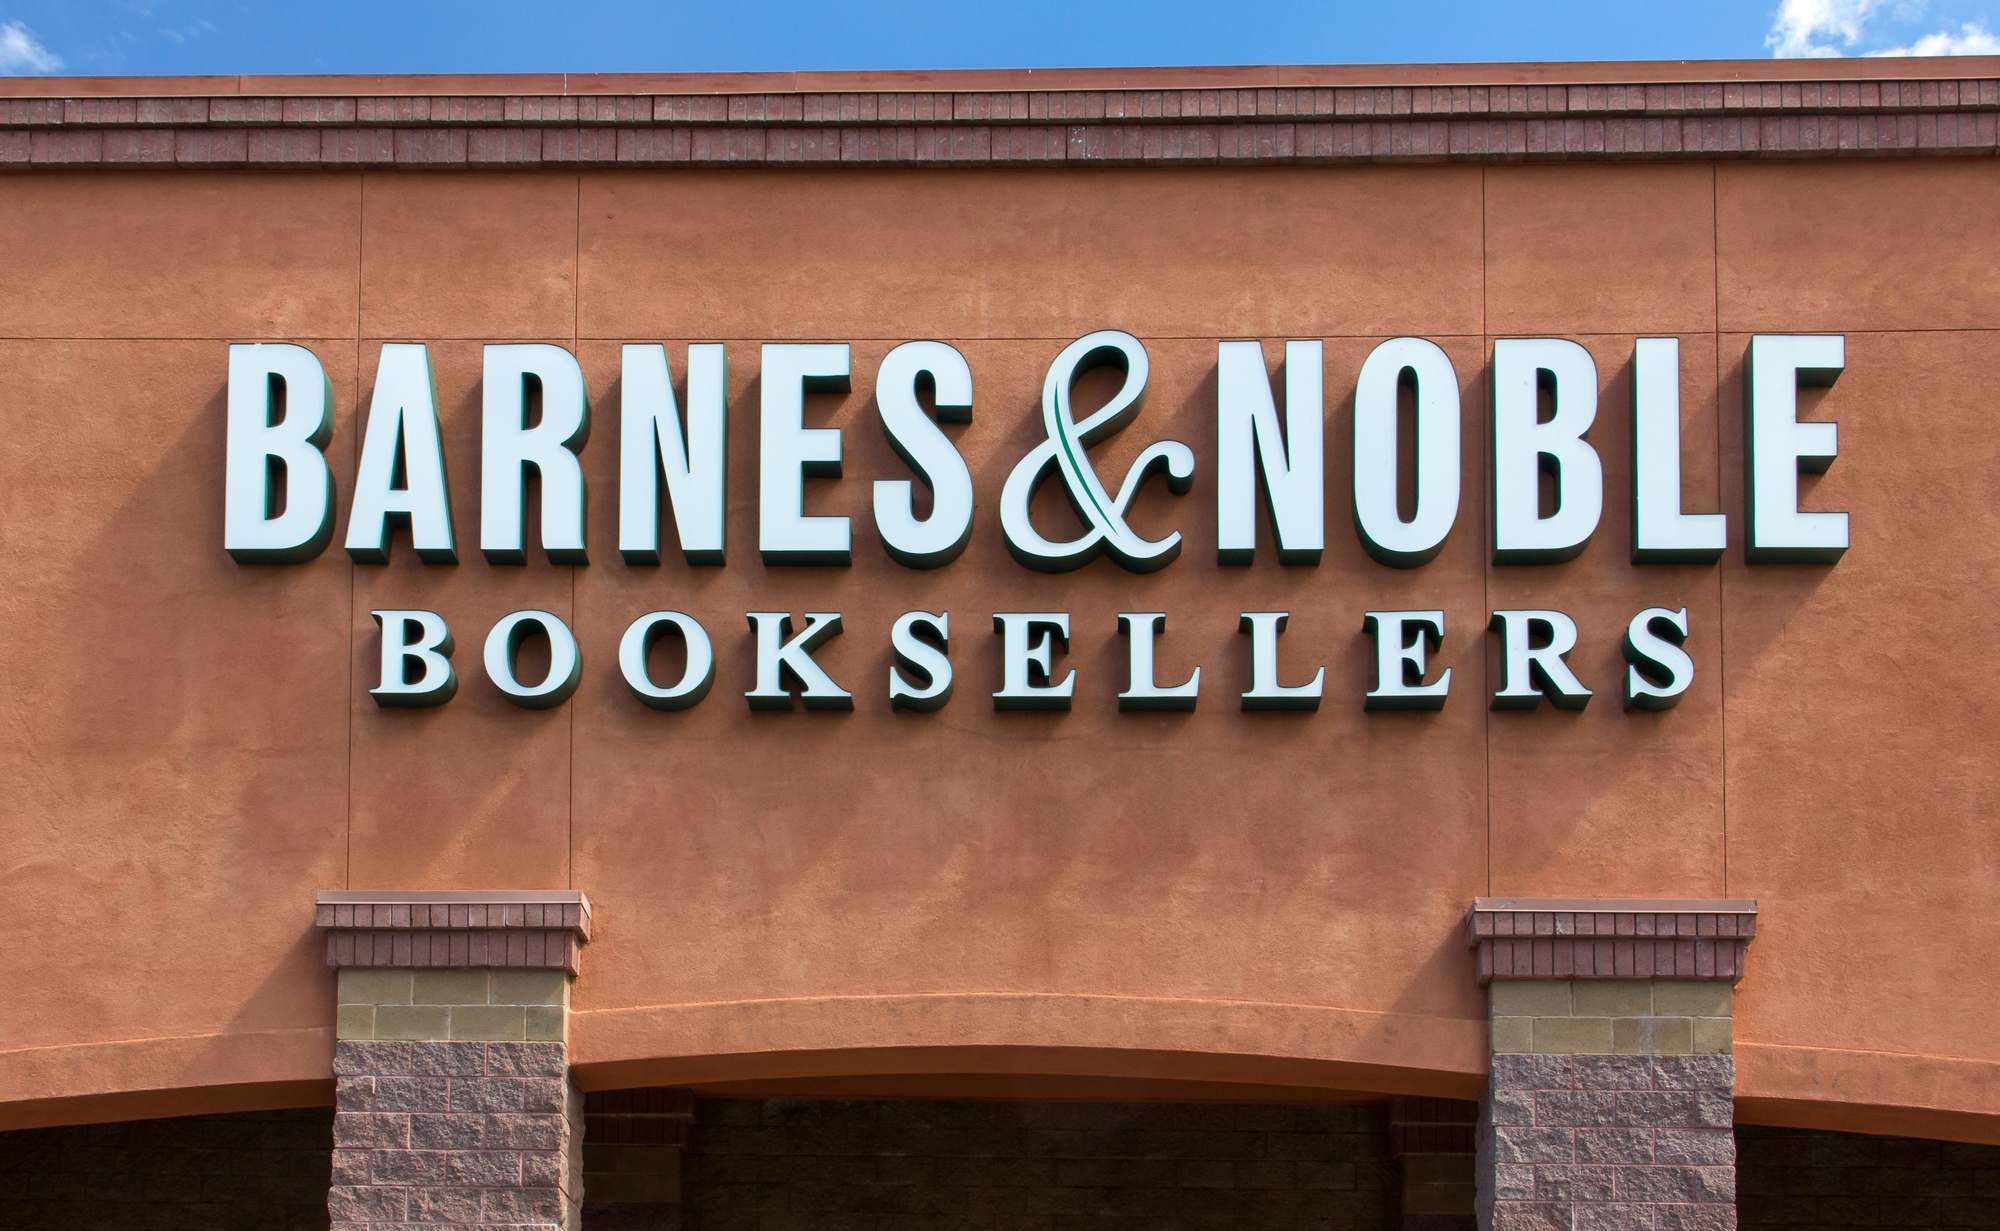 Barnes & Noble settlement has been reached for employees' overtime.